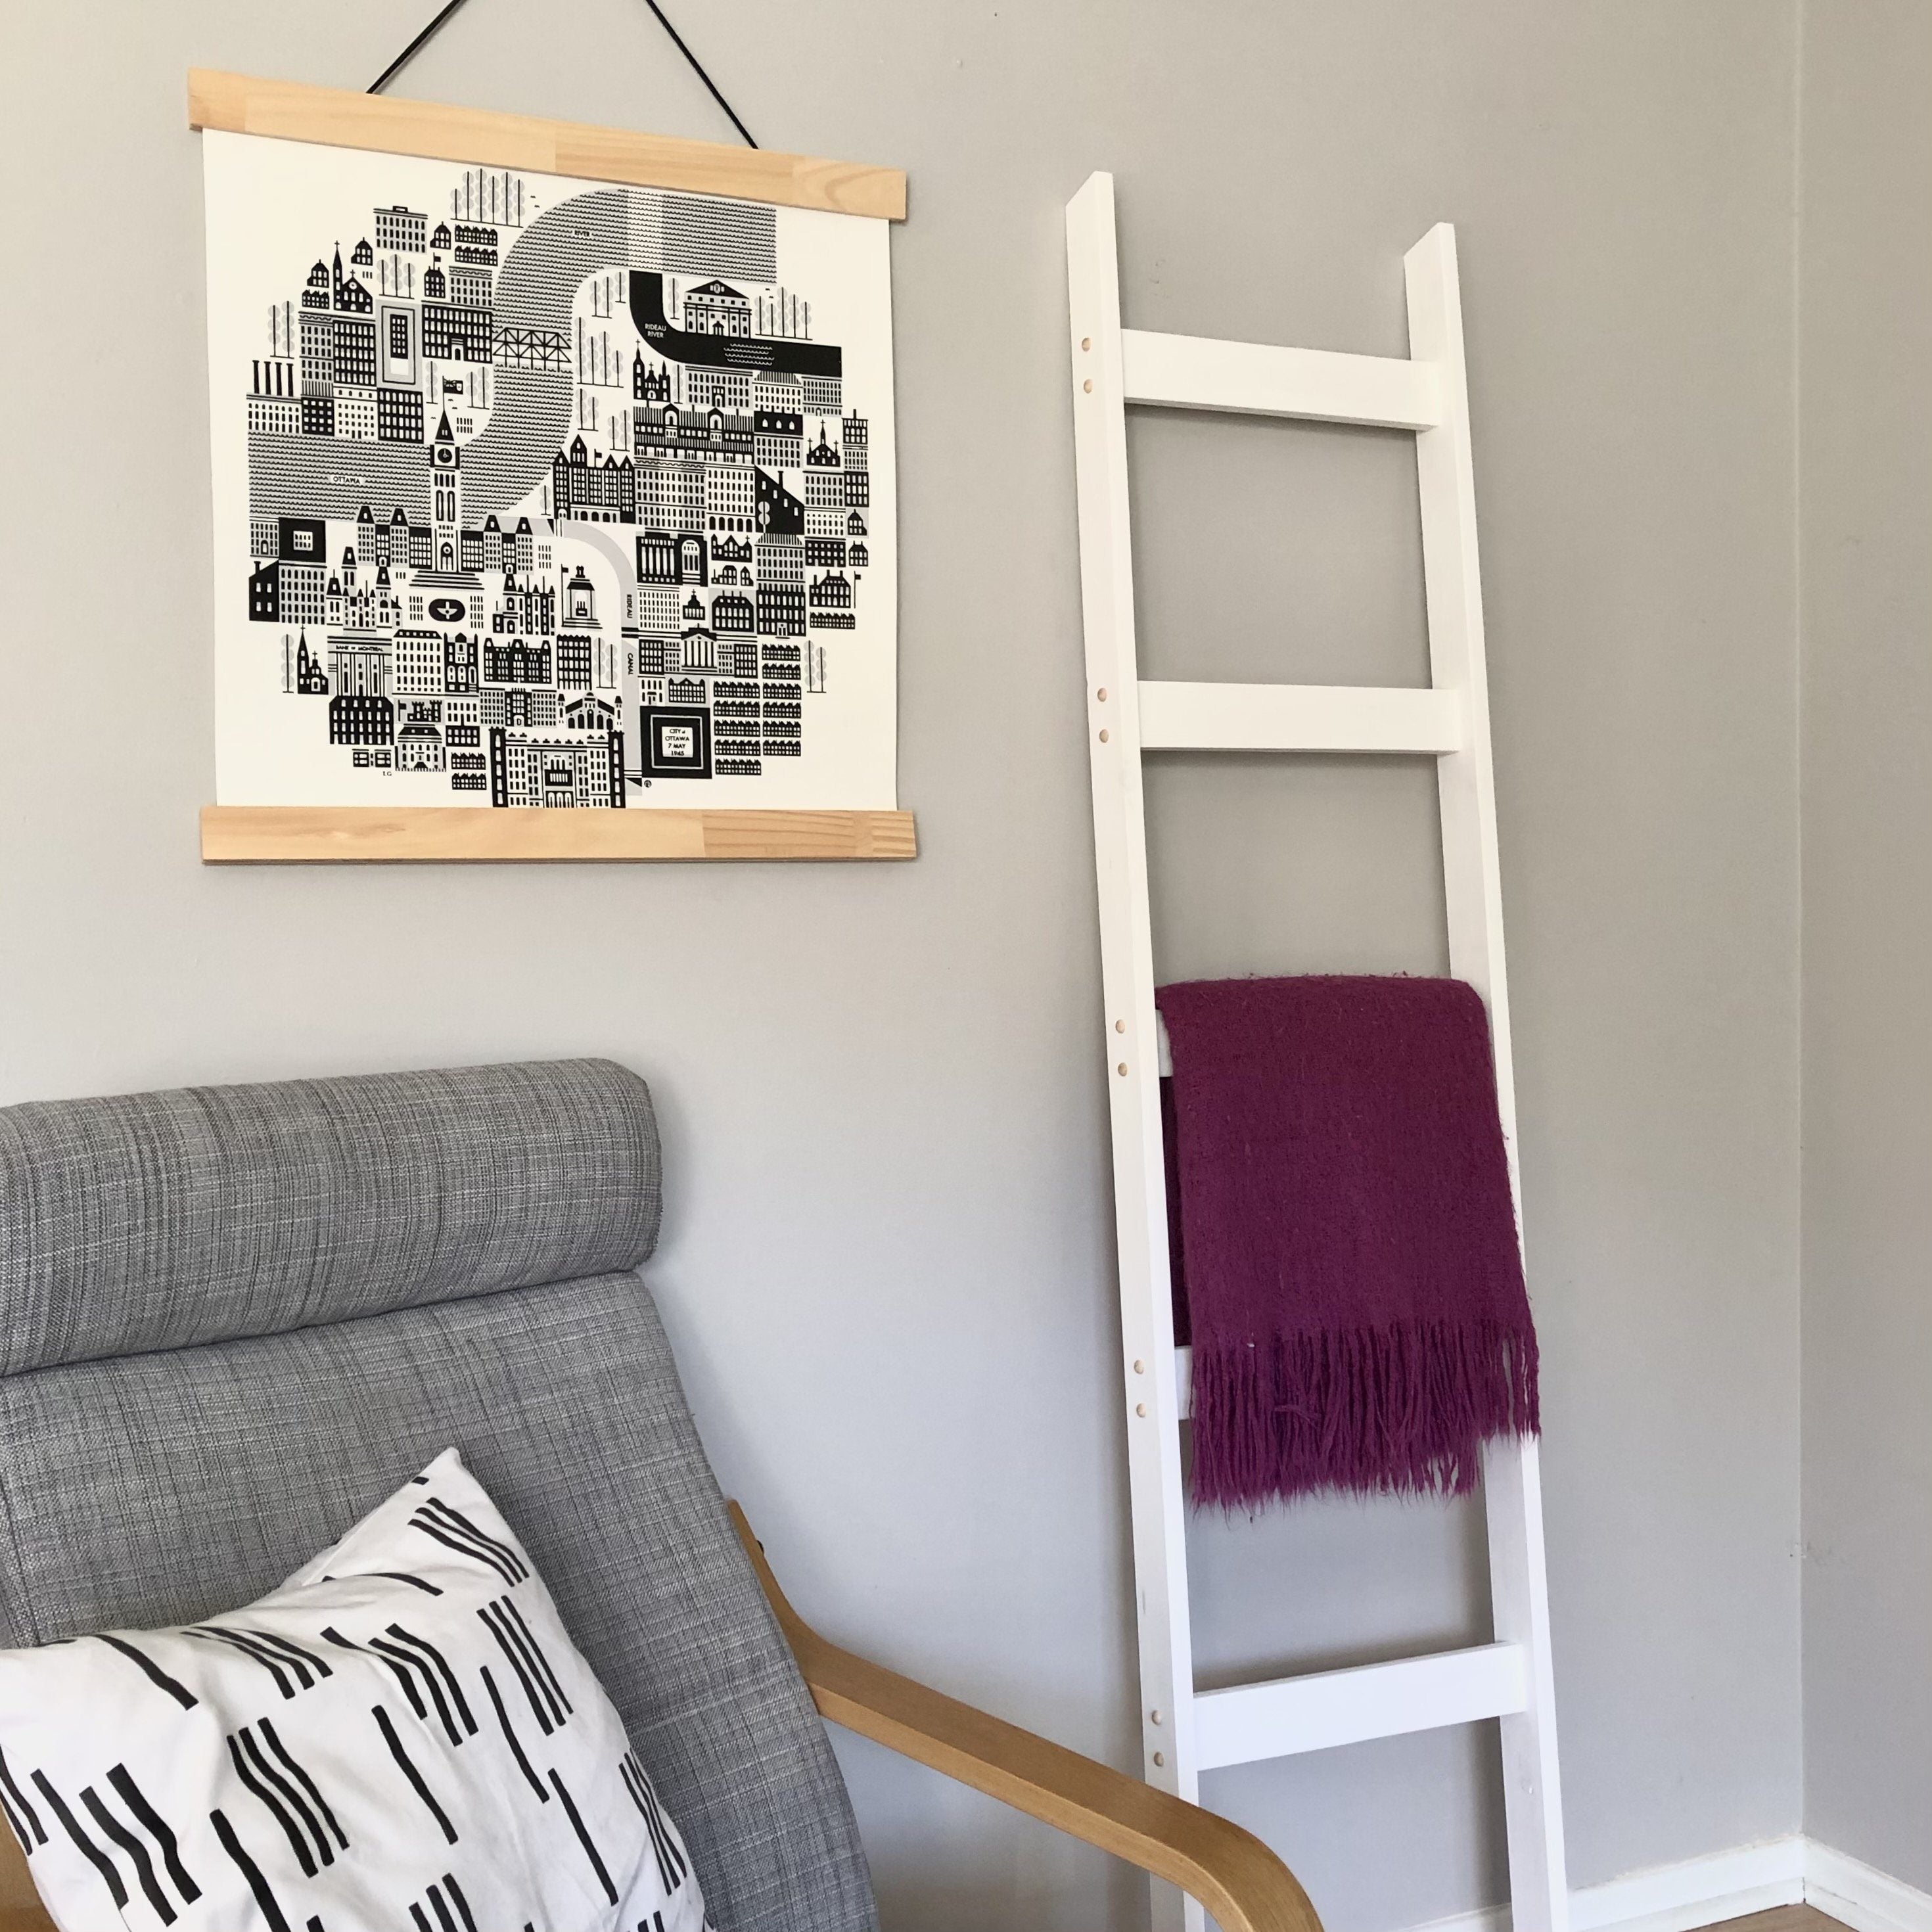 6ft Blanket Ladder in WHITE-WASH Project Pine Designs 